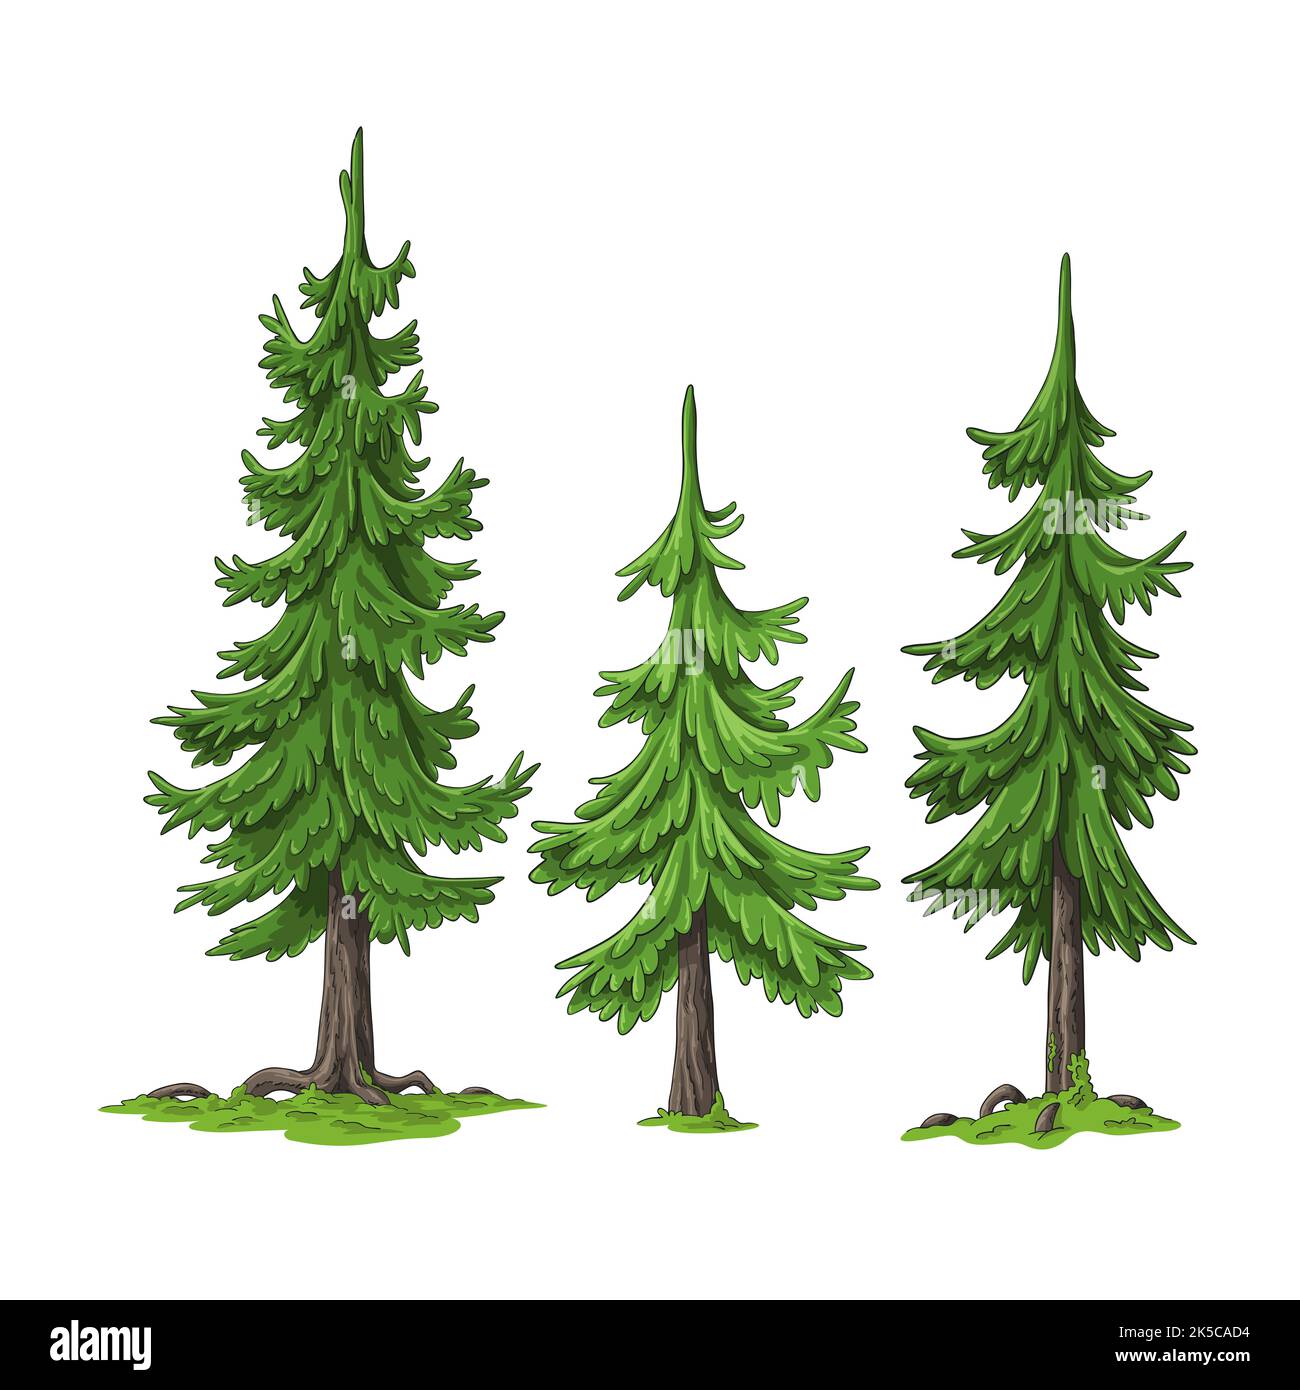 Collection of some cartoon trees, hand draw illustration Stock Photo